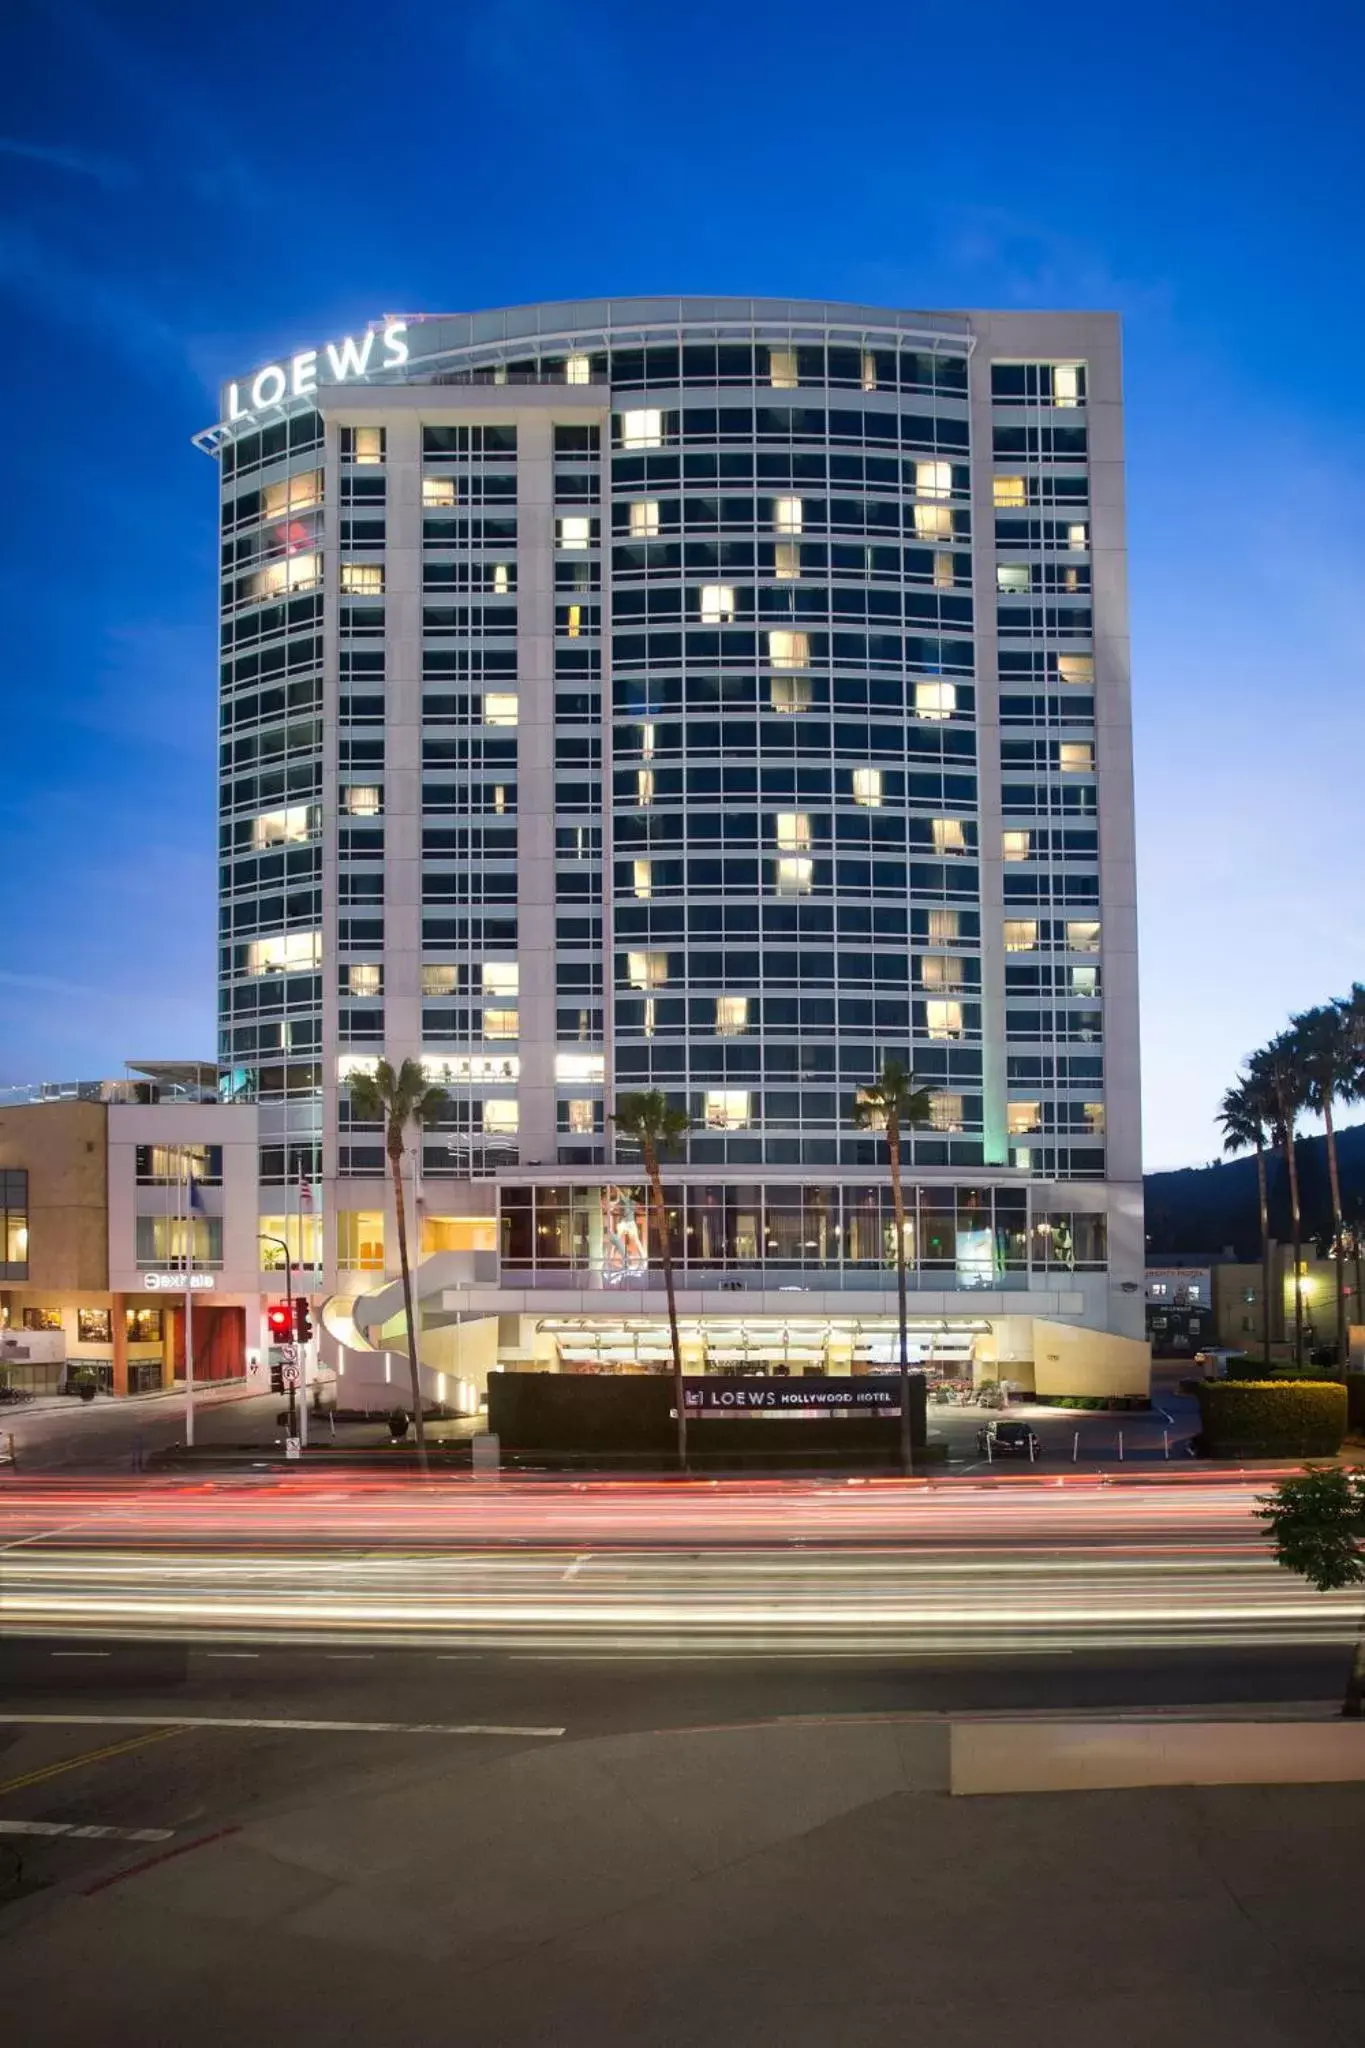 Property Building in Loews Hollywood Hotel